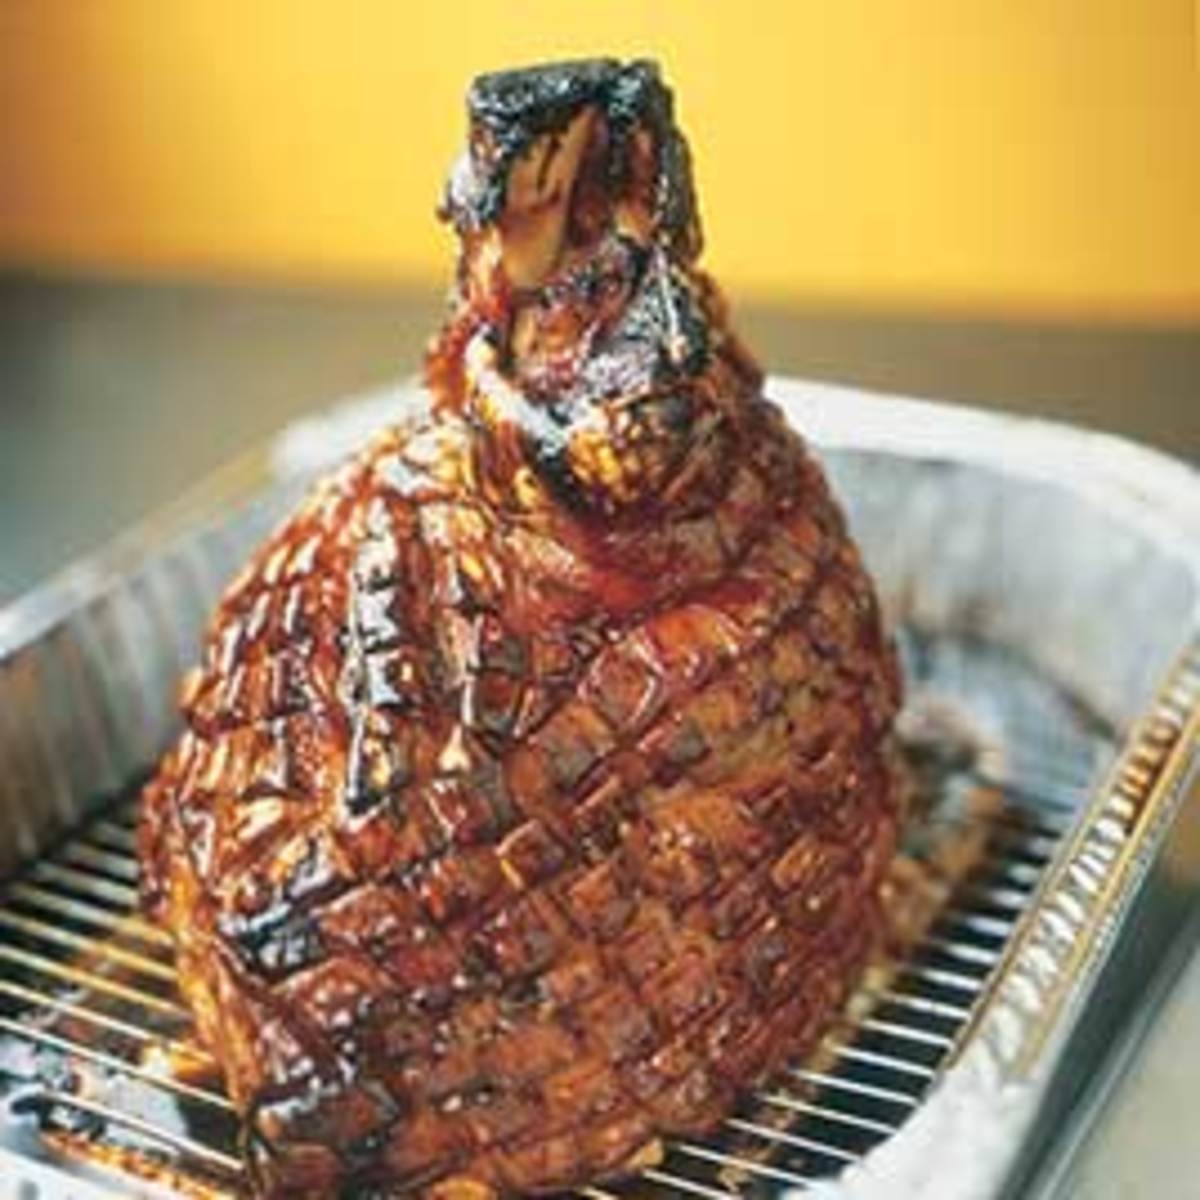 Allow the cooked ham to rest for at least 30 minutes before carving. 